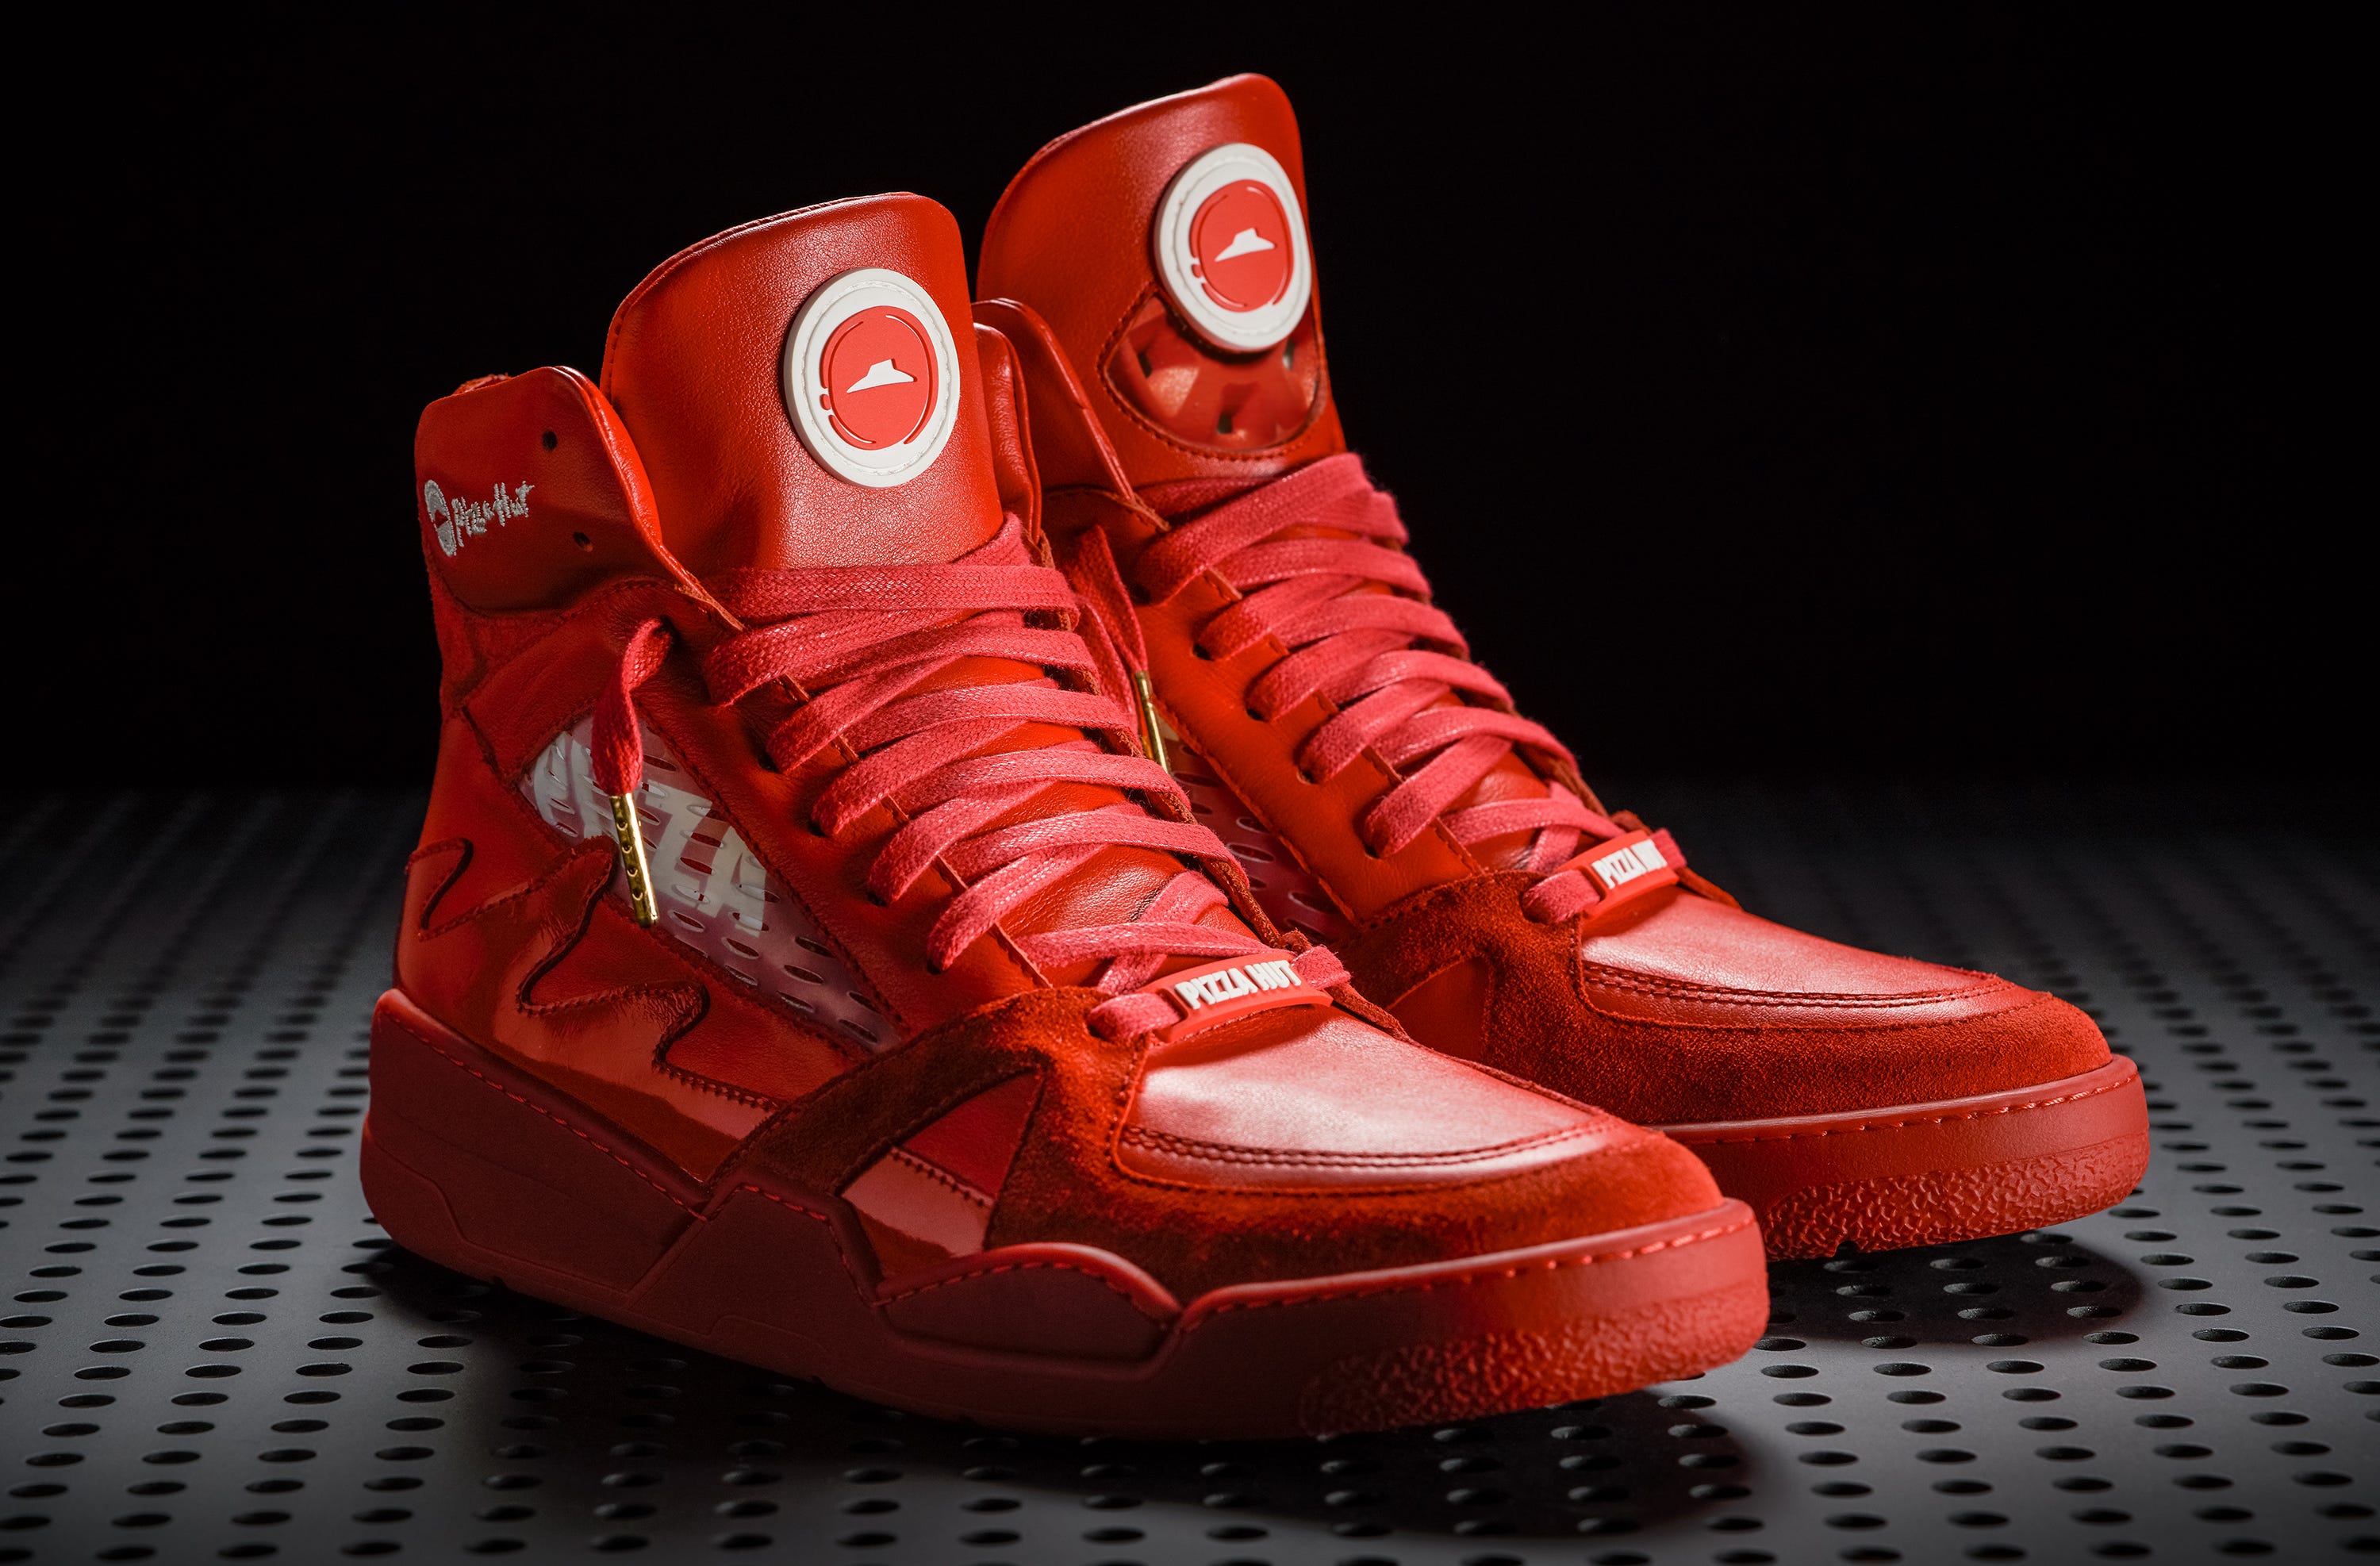 Order Pizza Hut through sneakers? I 